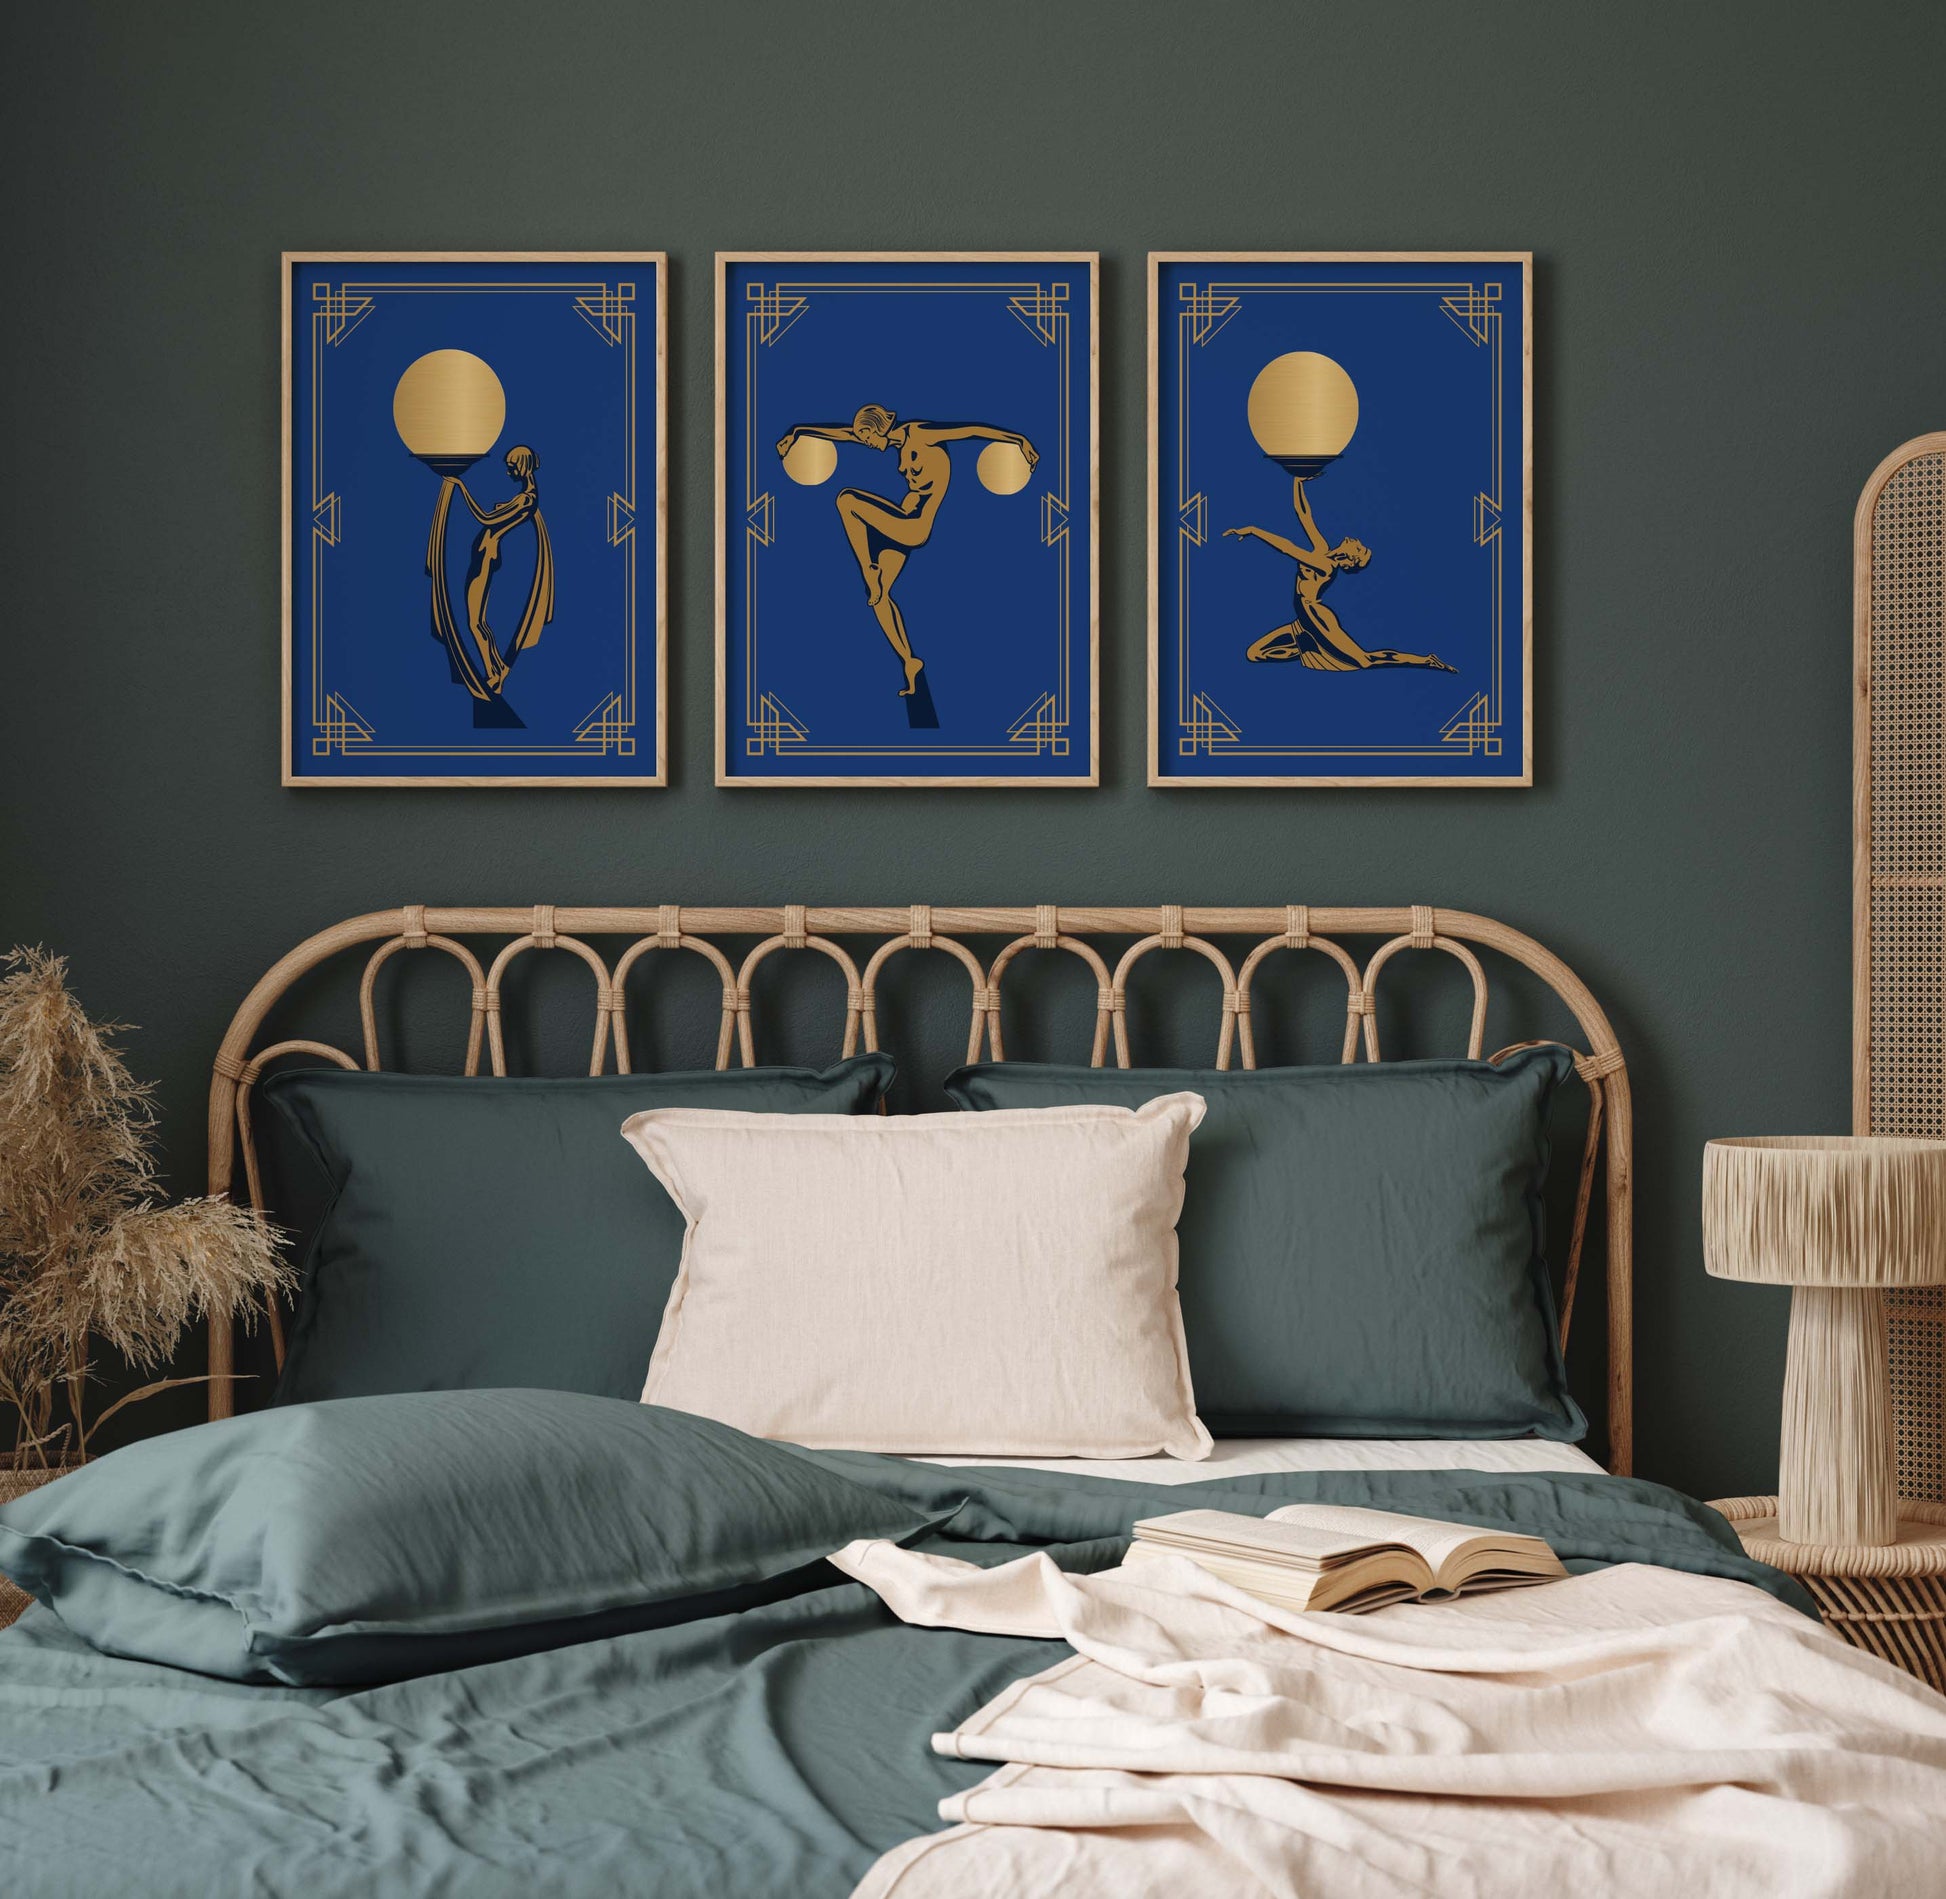 Set of 3 art deco woman posters in blue and gold